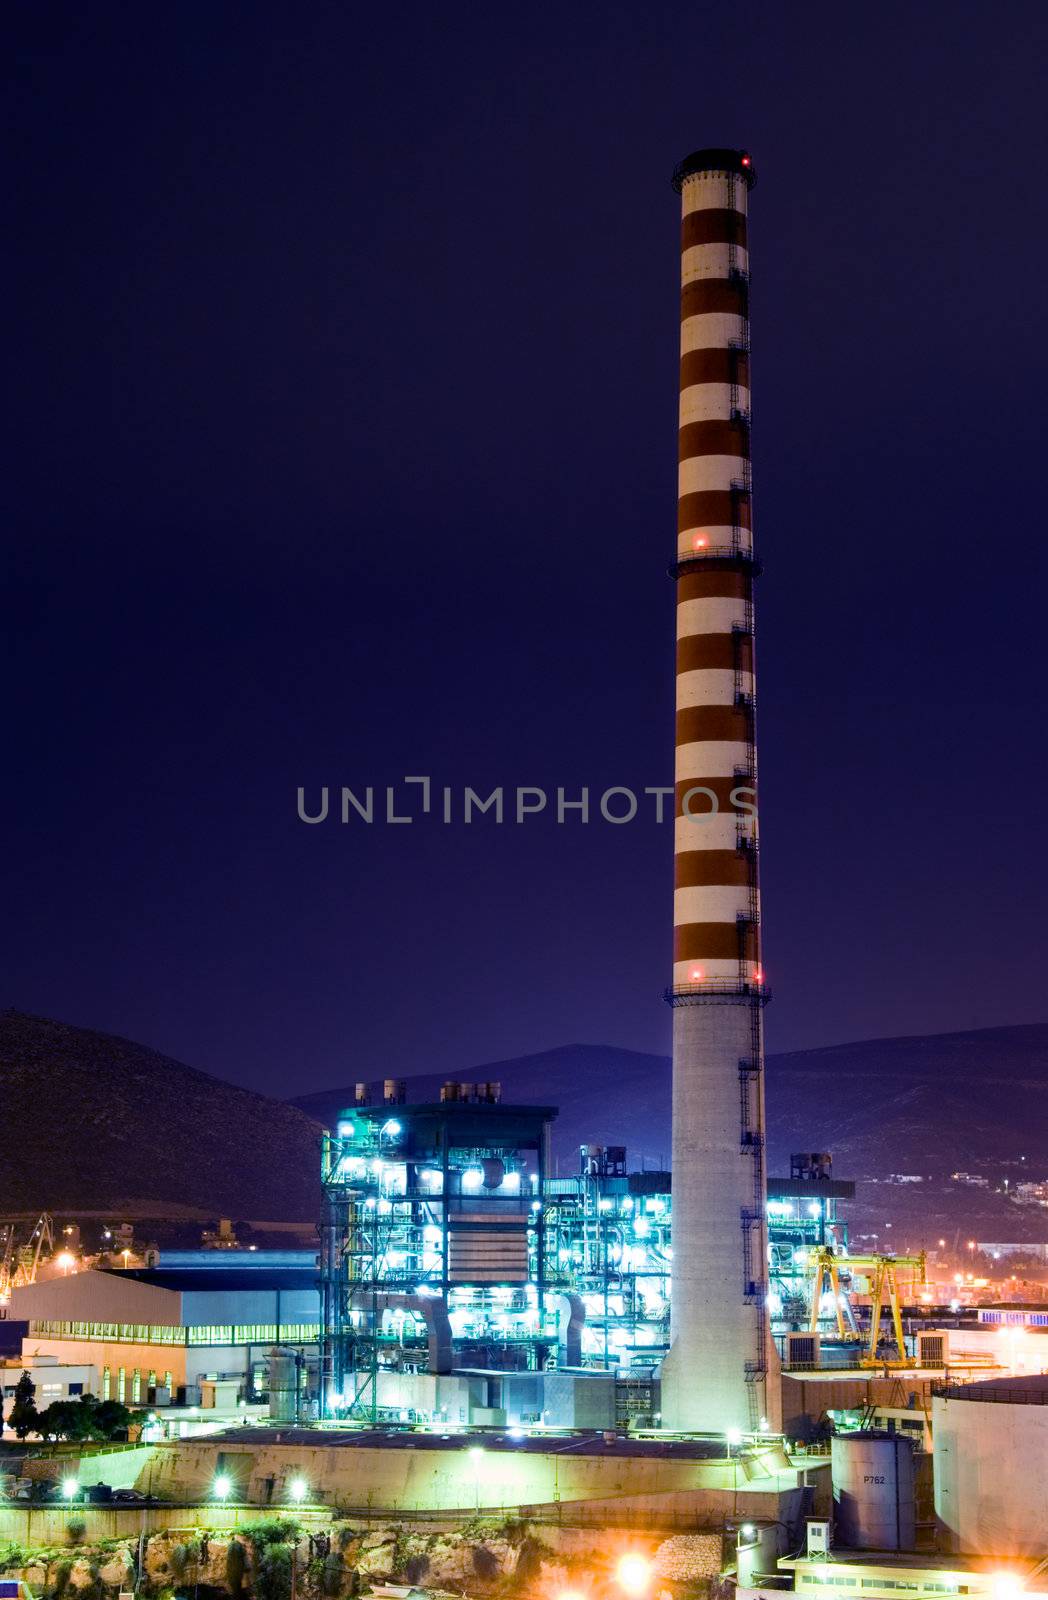 Industrial site from Piraeus, Greece at dusk